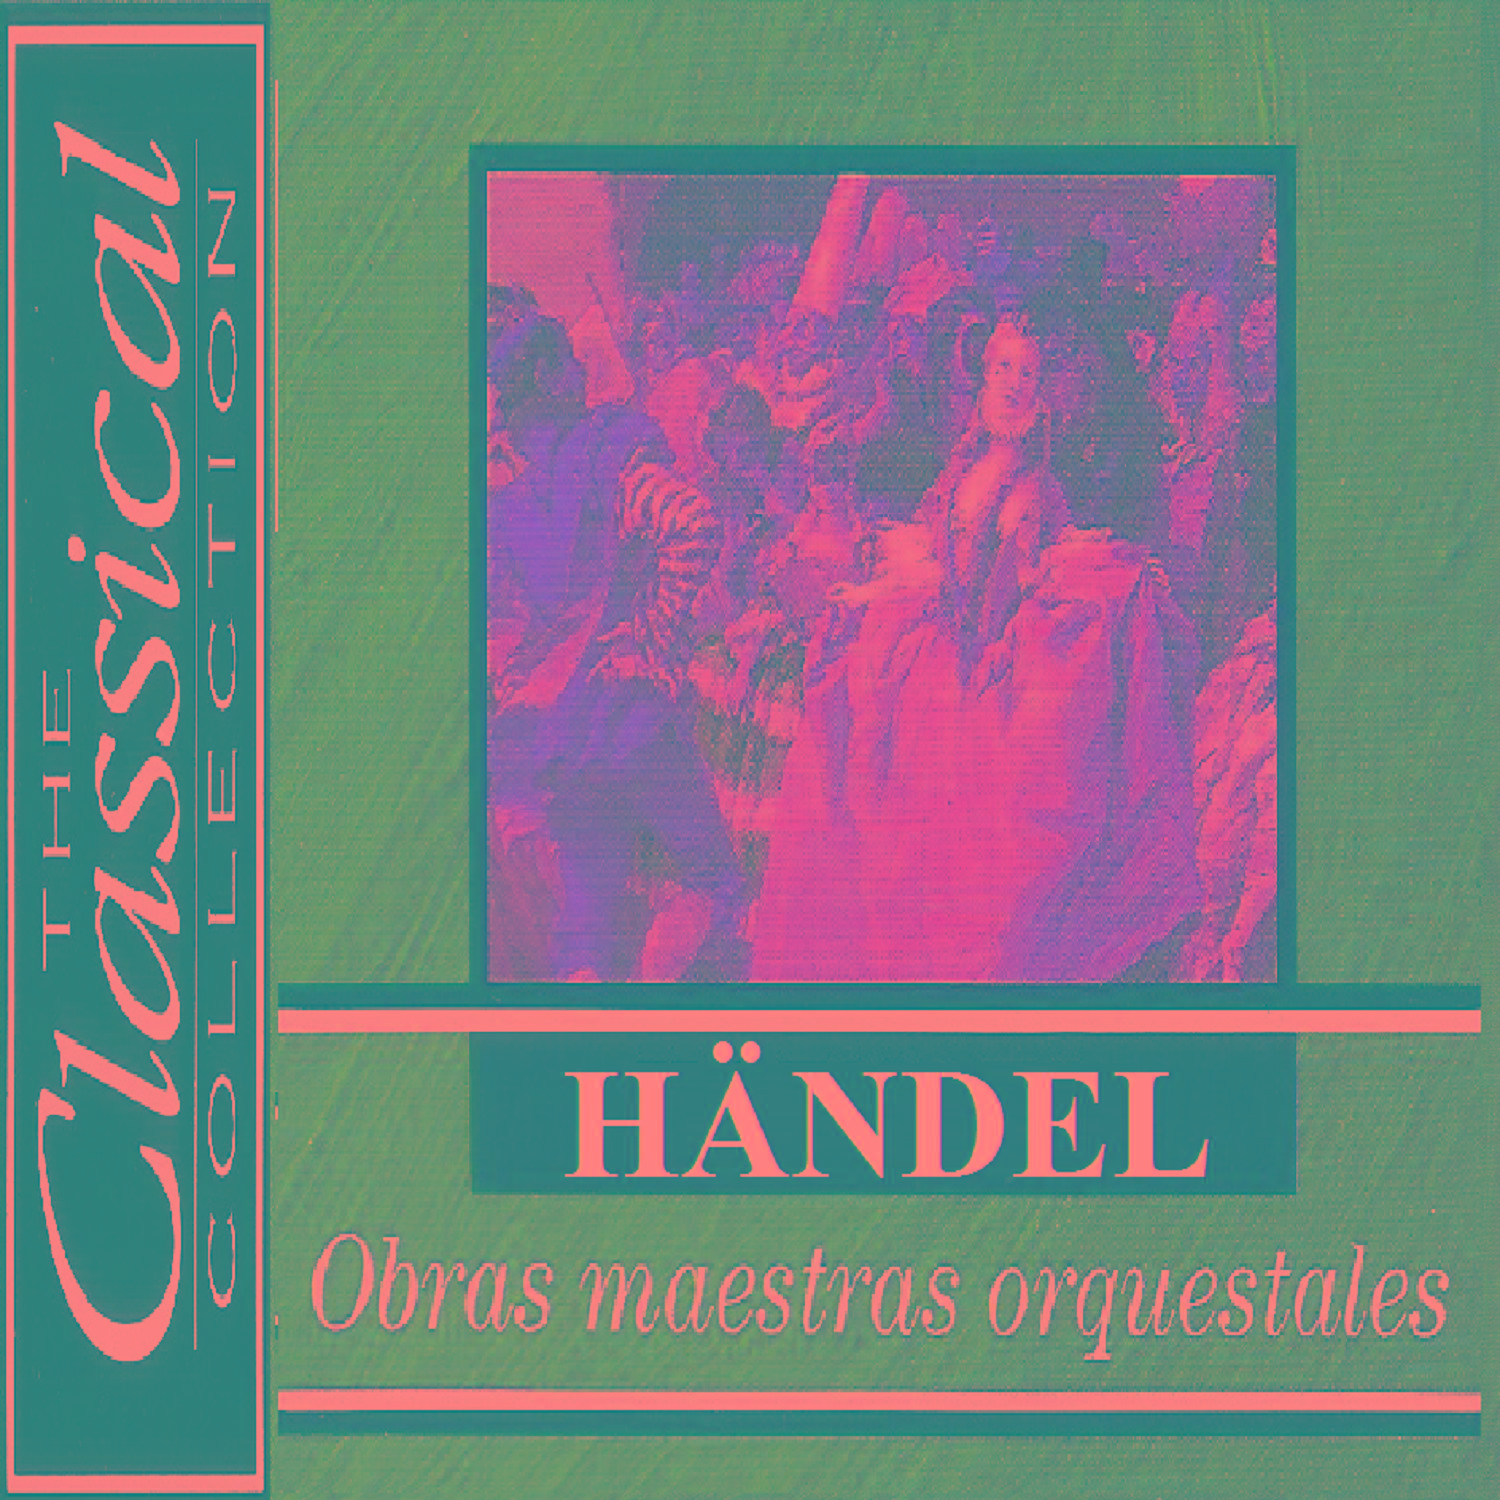 The Classical Collection  H ndel  Obras maestras orquestrales